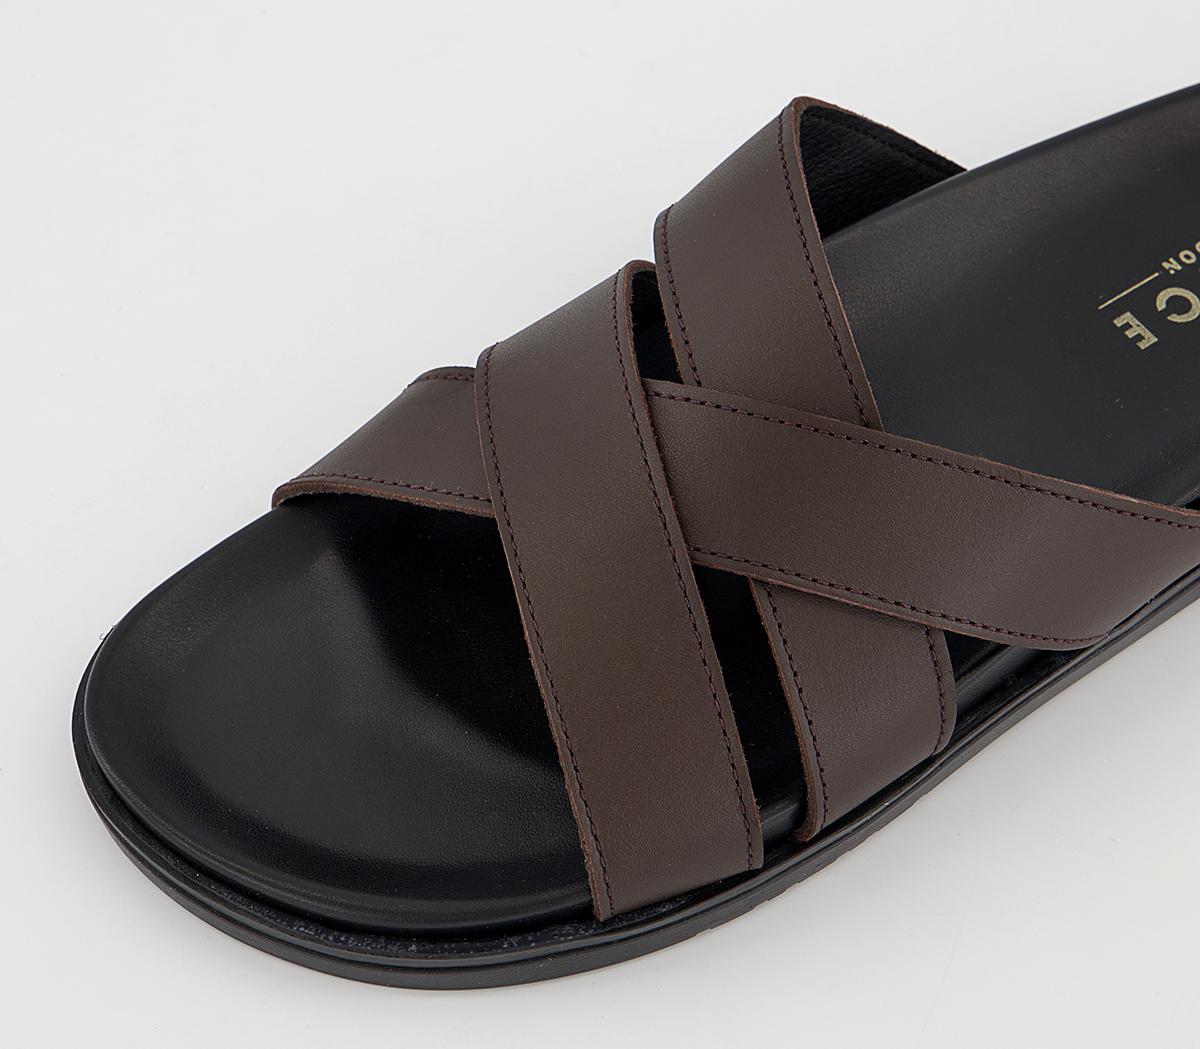 OFFICE Stockport 3 Strap Crossover Sandals Brown Leather - Men’s Sandals